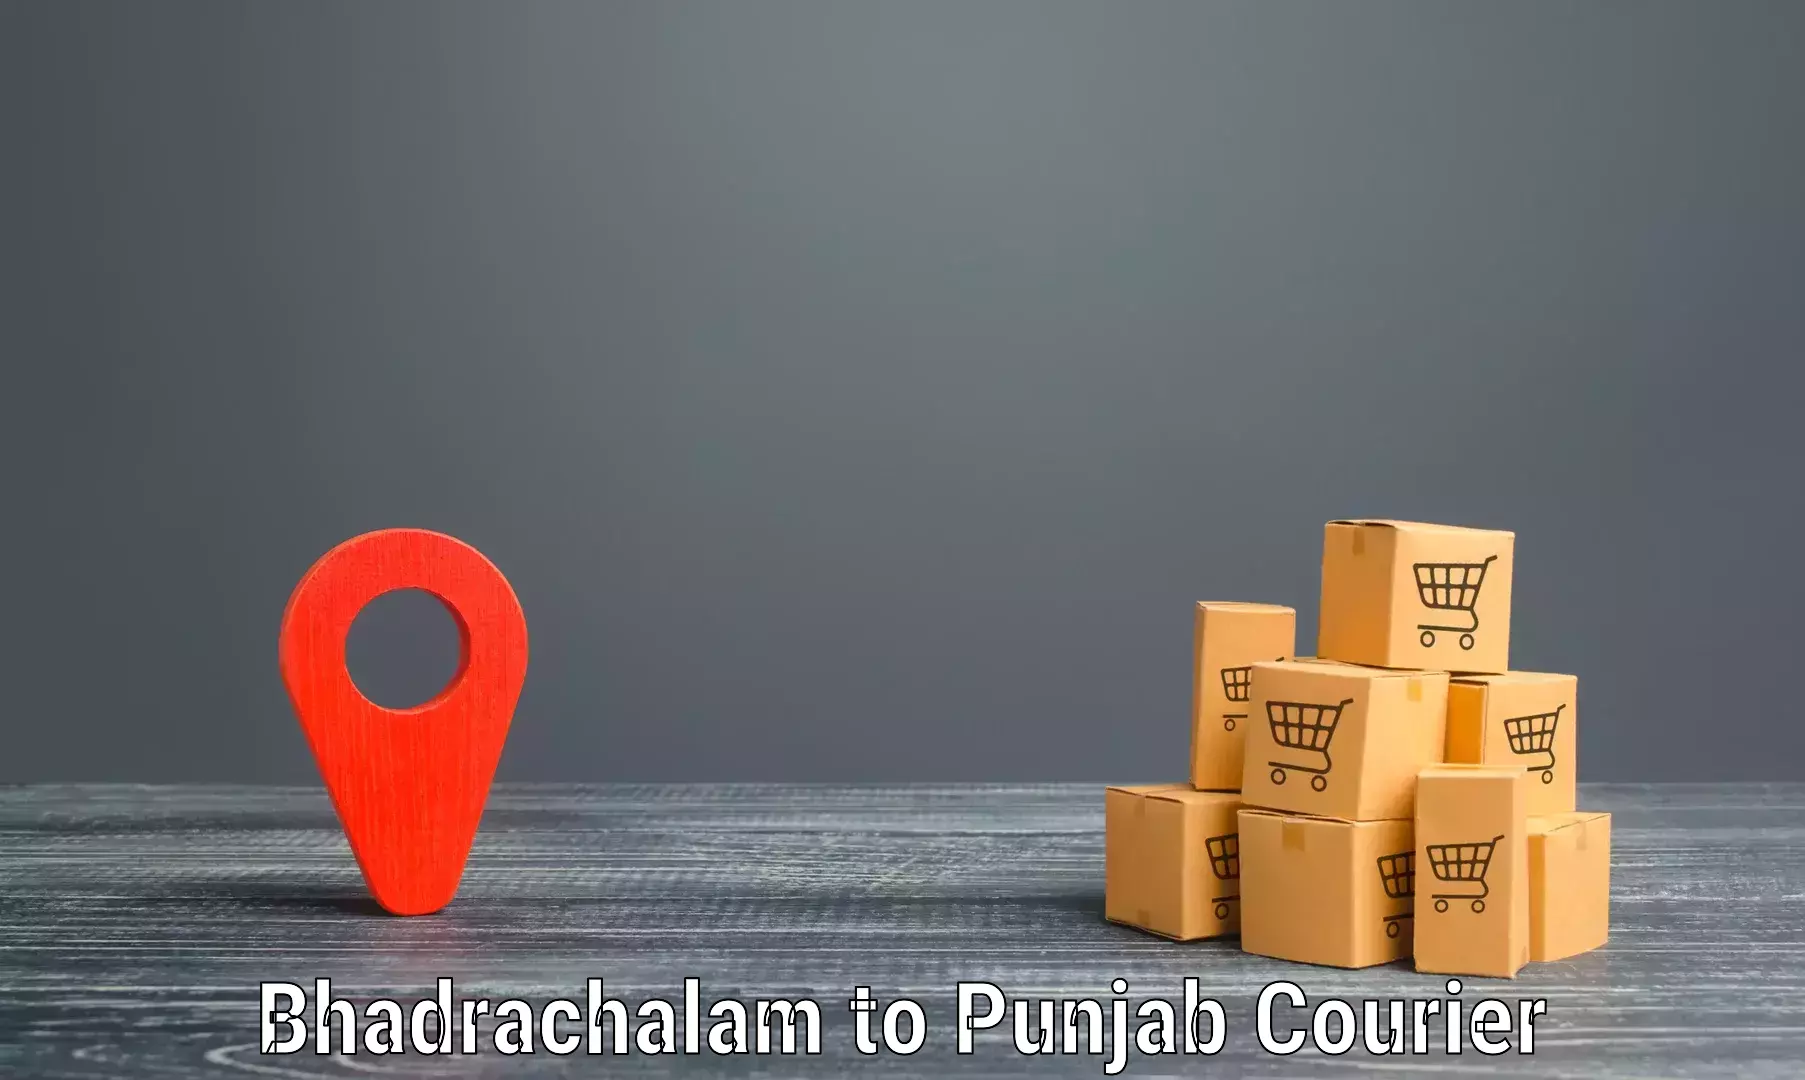 Digital courier platforms in Bhadrachalam to Mohali